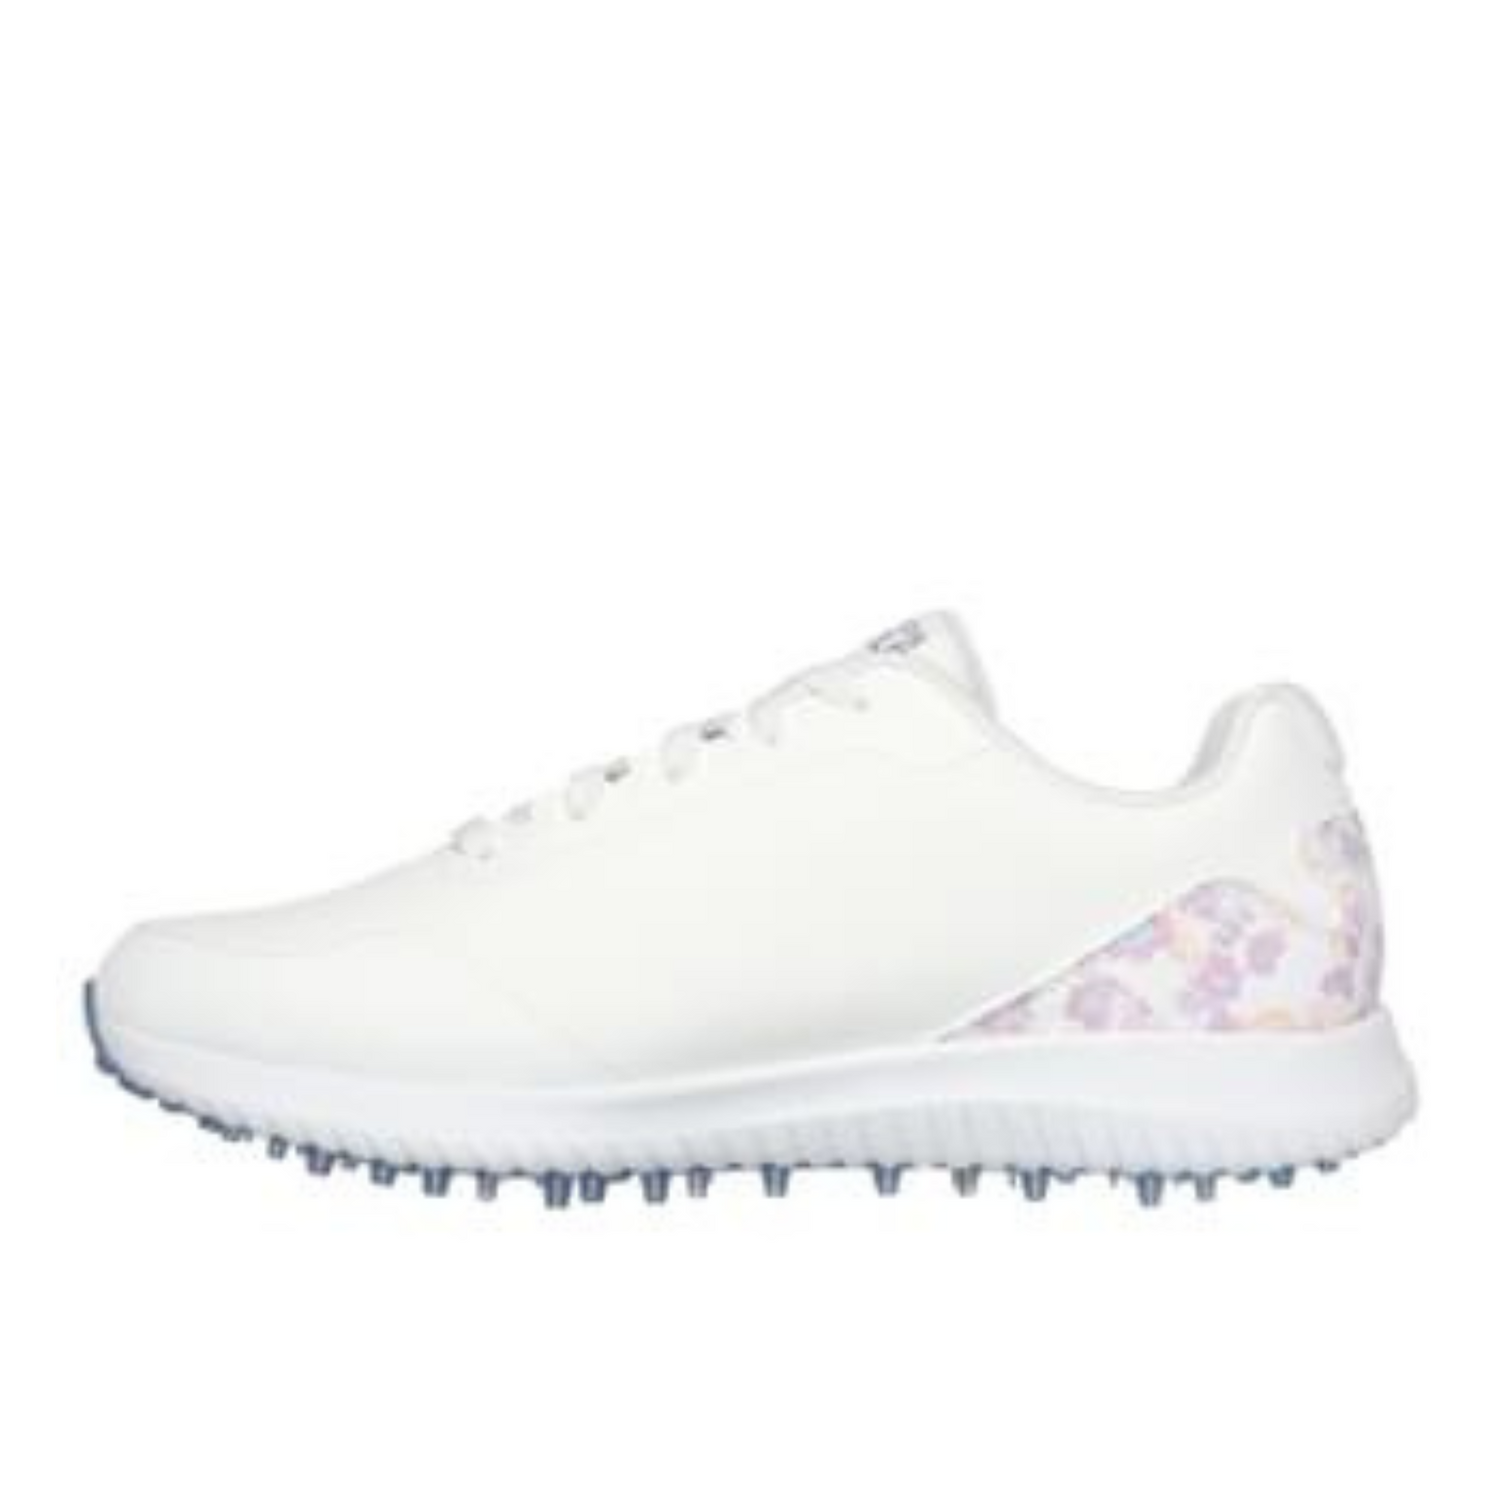 Skechers Go Golf Max 3 Ladies Spikeless Golf Shoes 123080 - White   